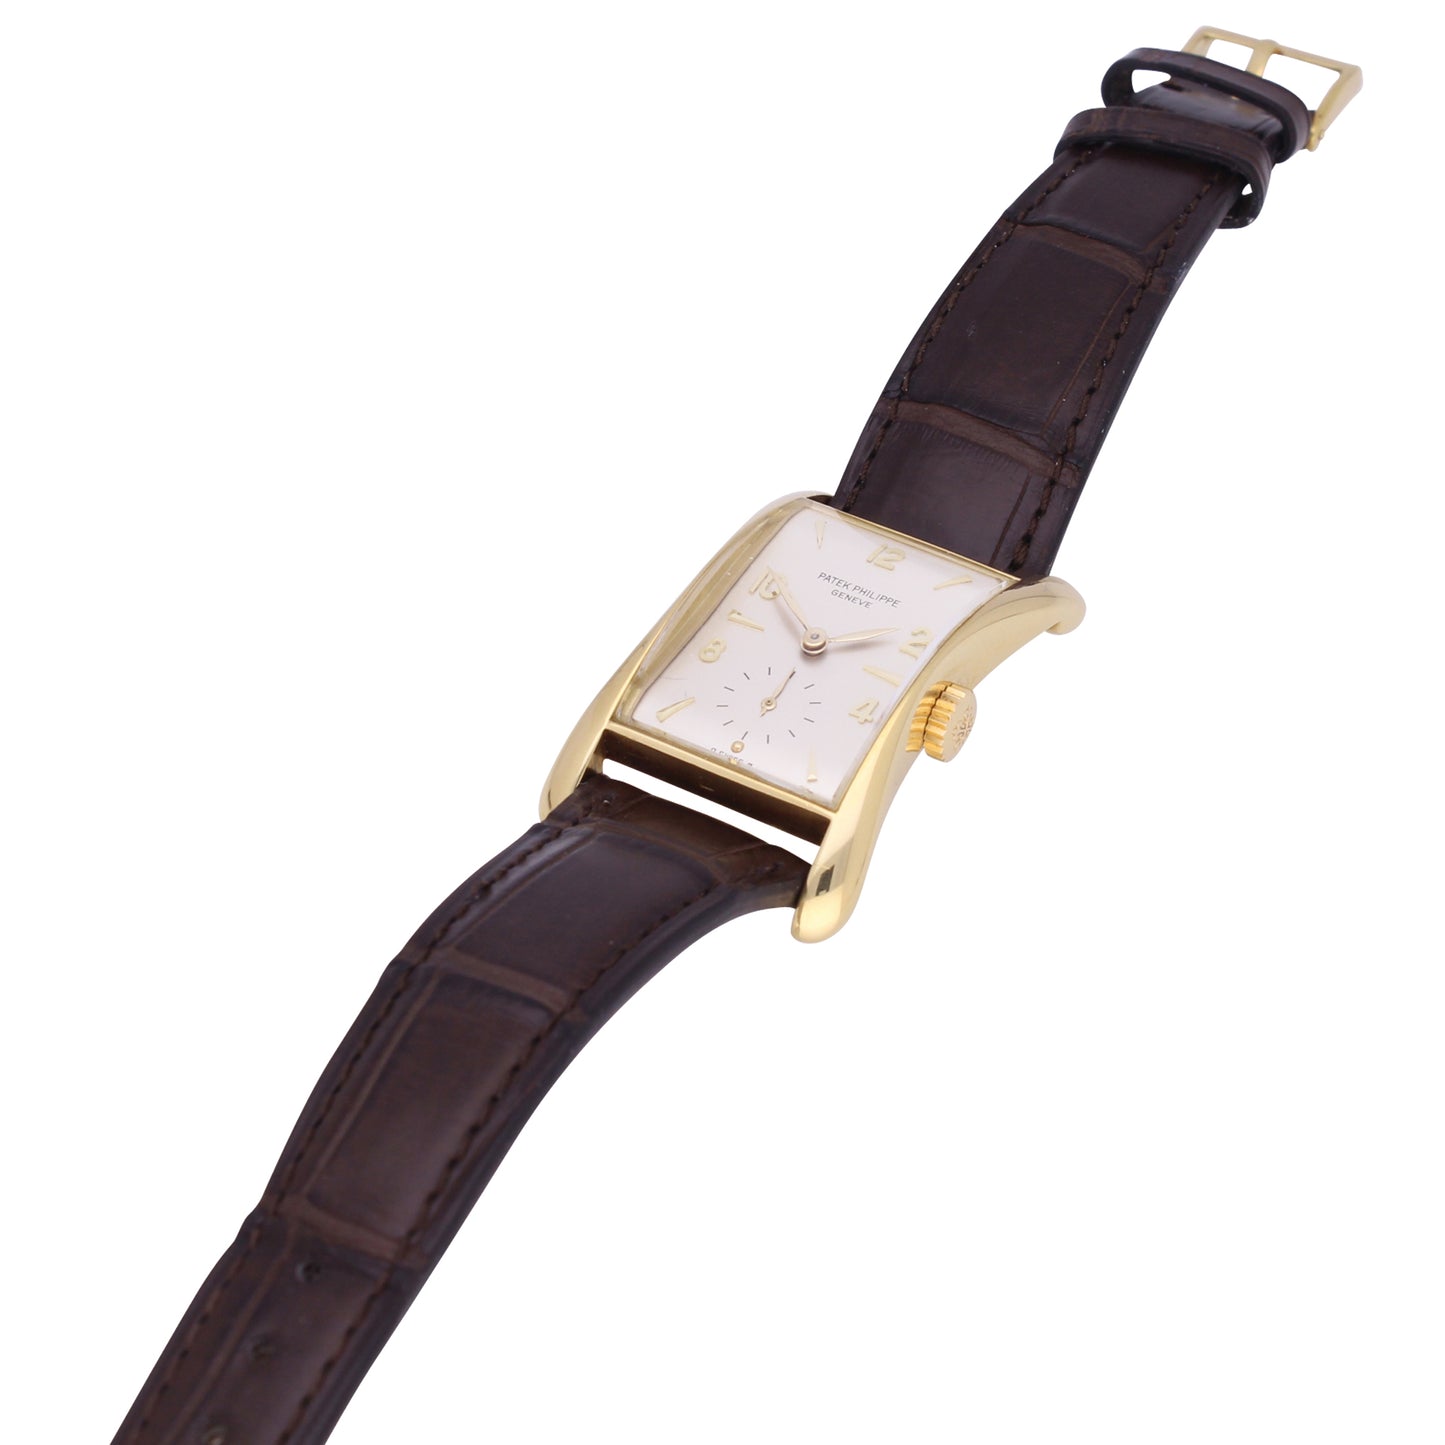 18ct yellow gold, reference 2442 "Marilyn Monroe" wristwatch. Made 1953